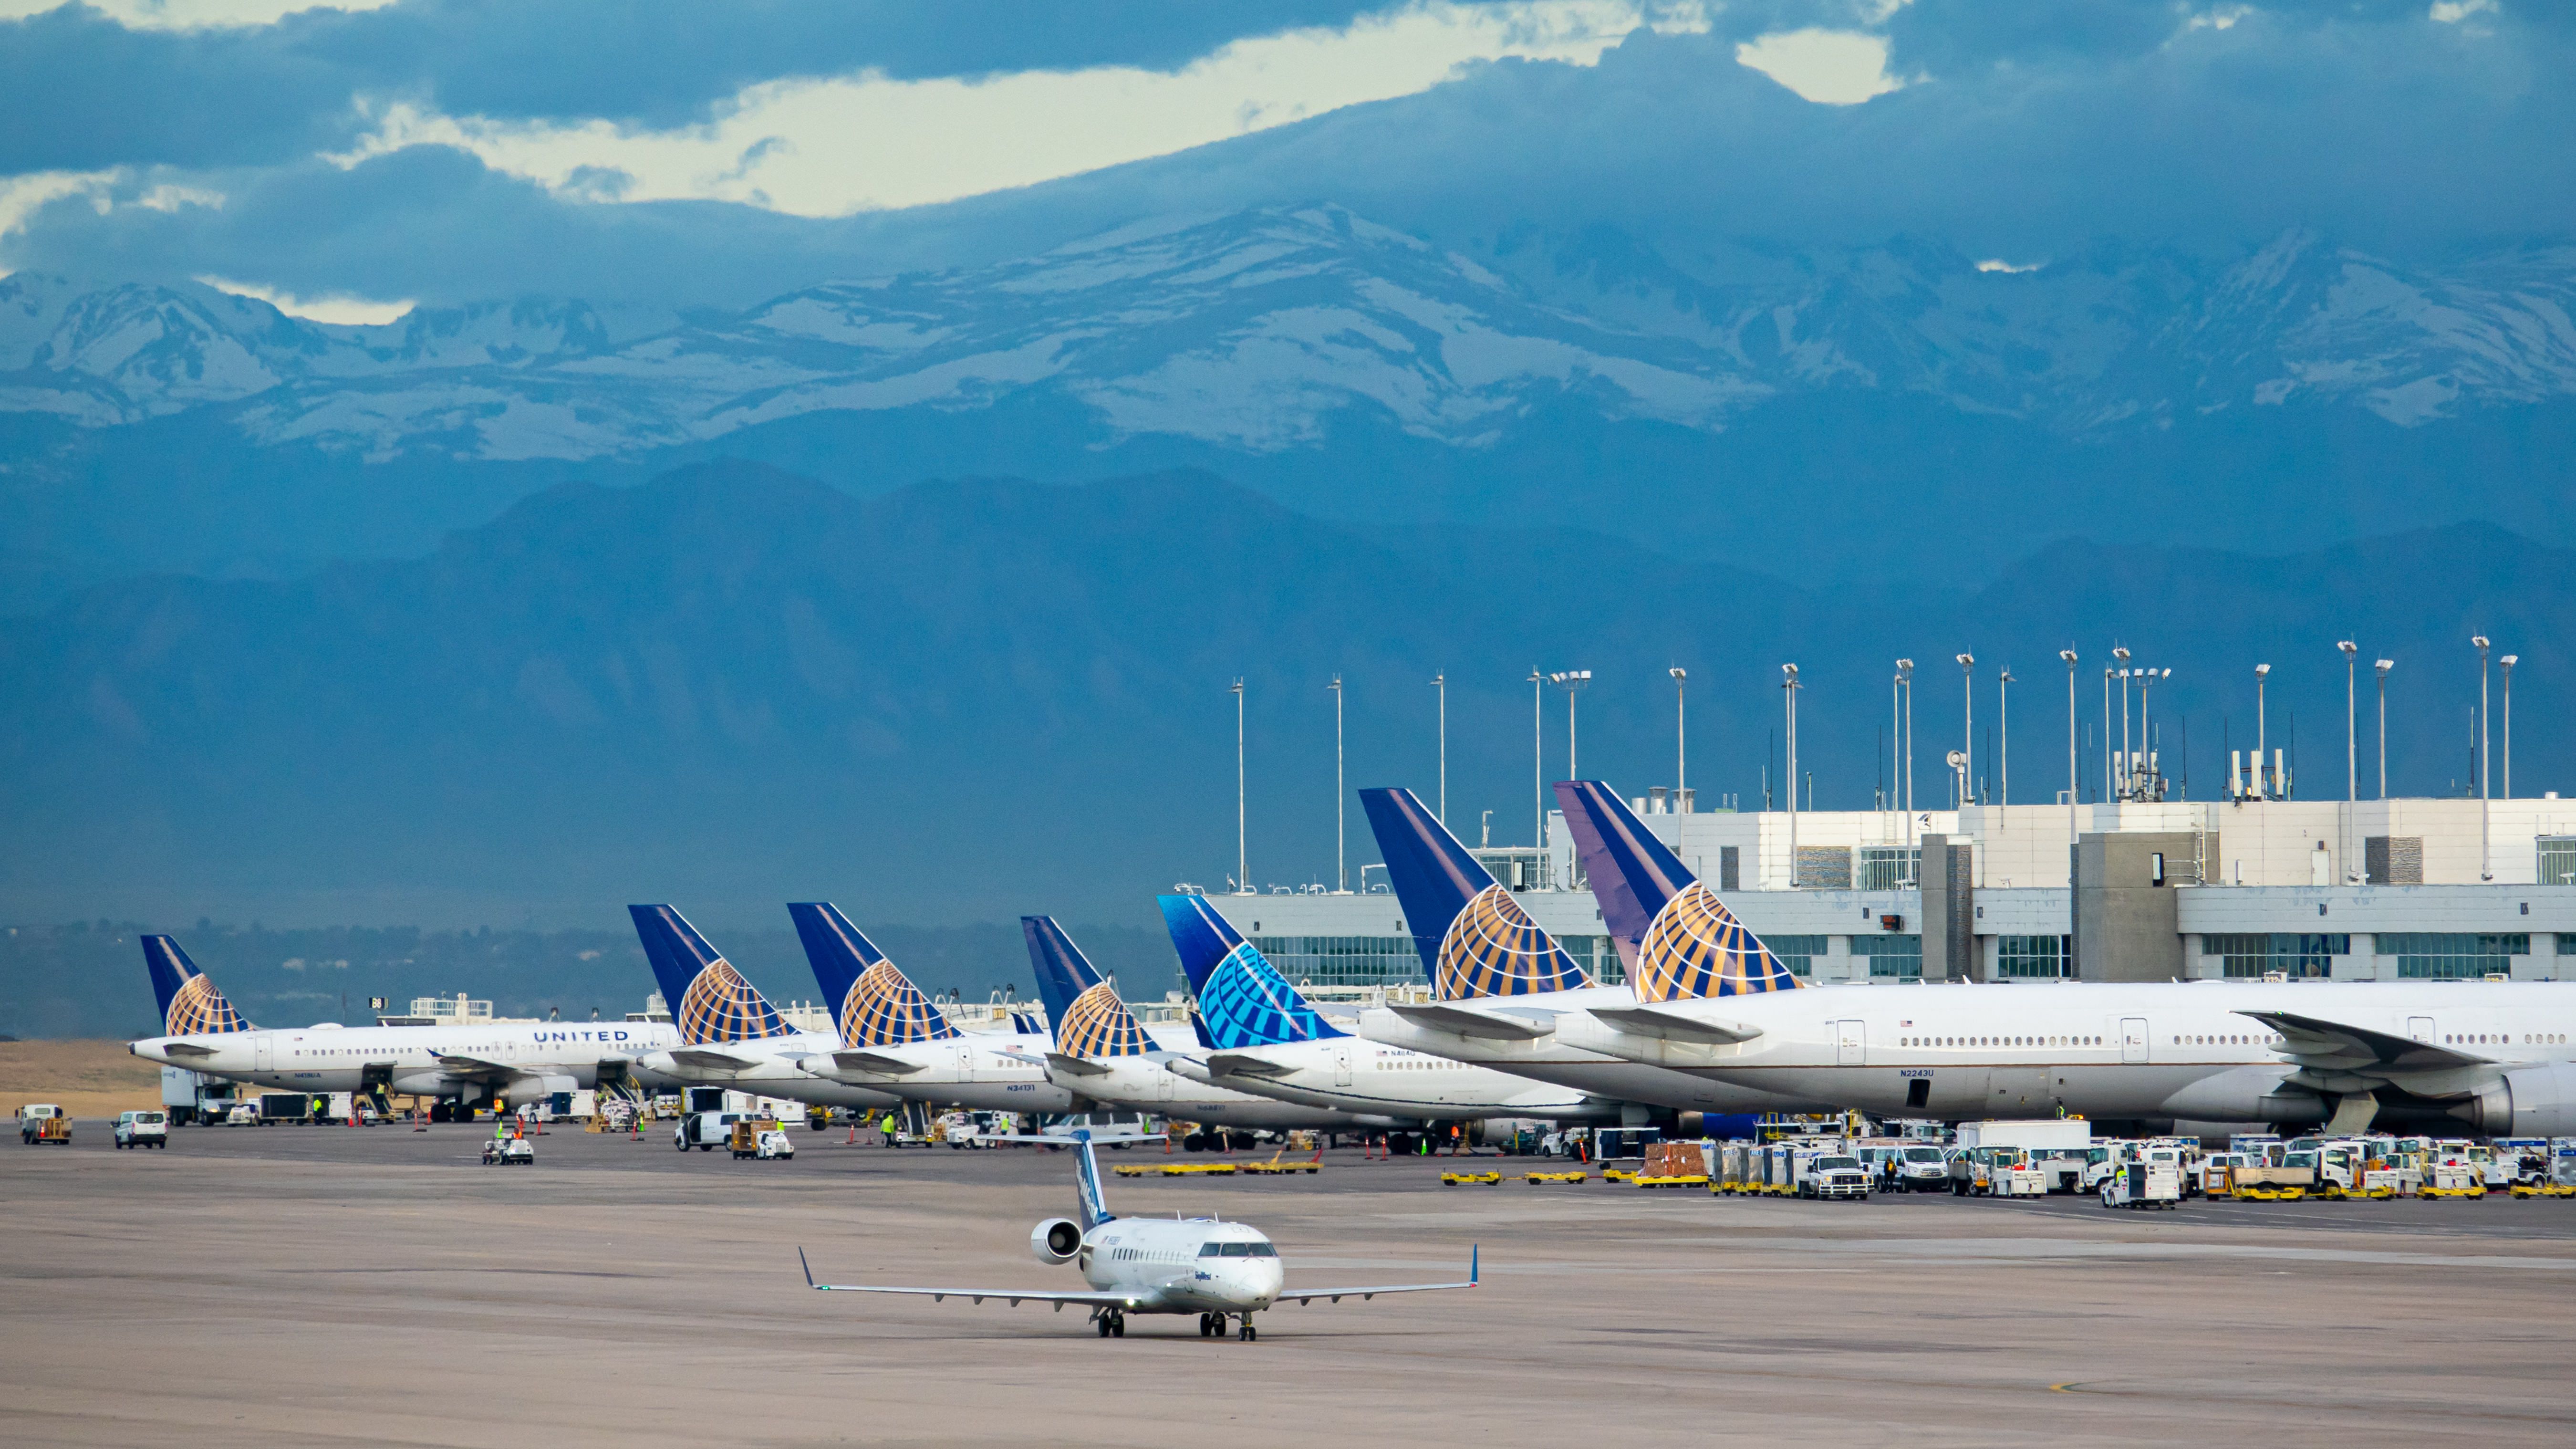 United Airlines airplanes on the apron